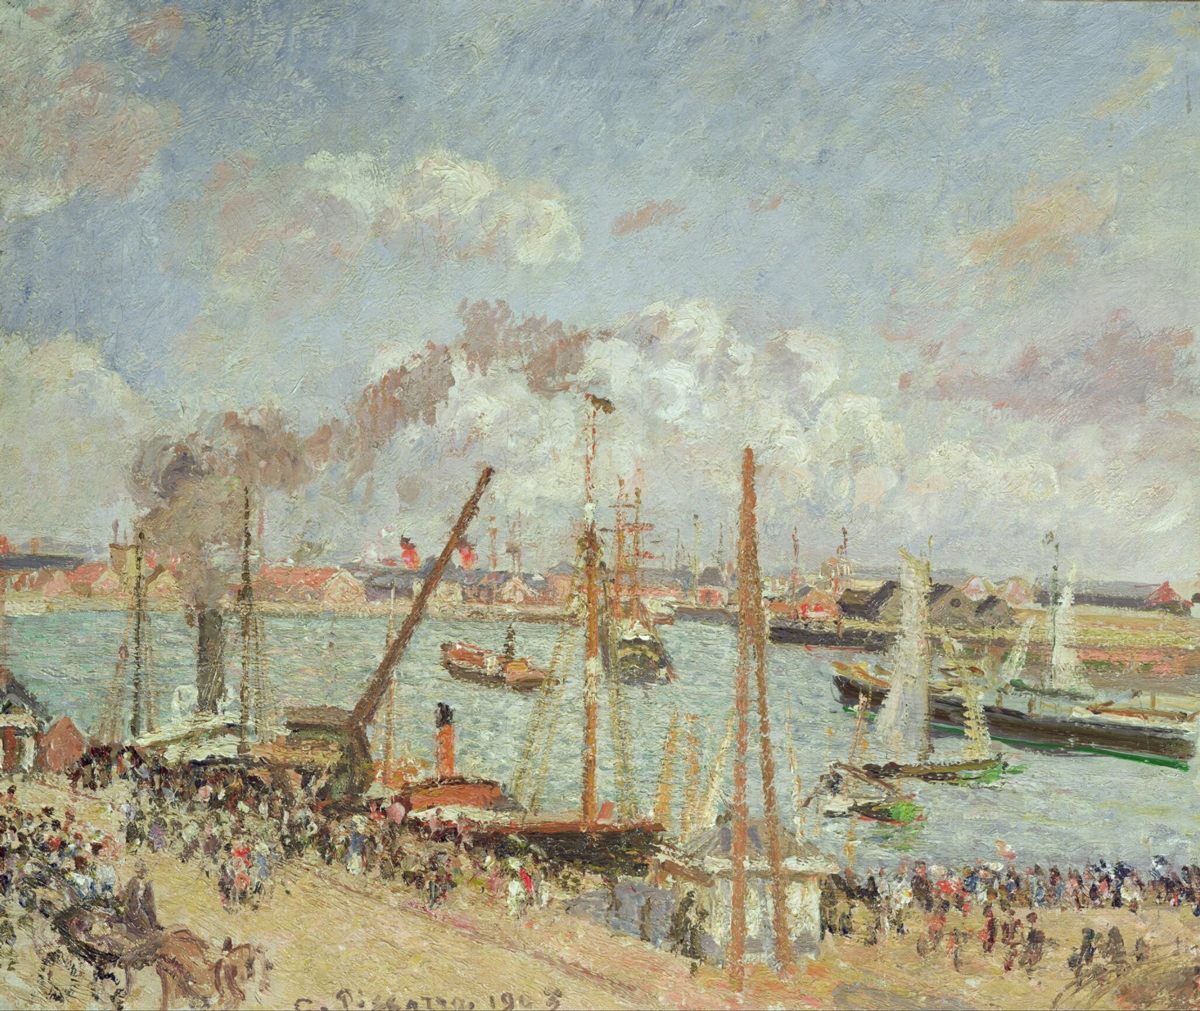 Camille Pissarro's The Anse des Pilotes, Le Havre (1903) is the currently the subject of a restitution lawsuit.